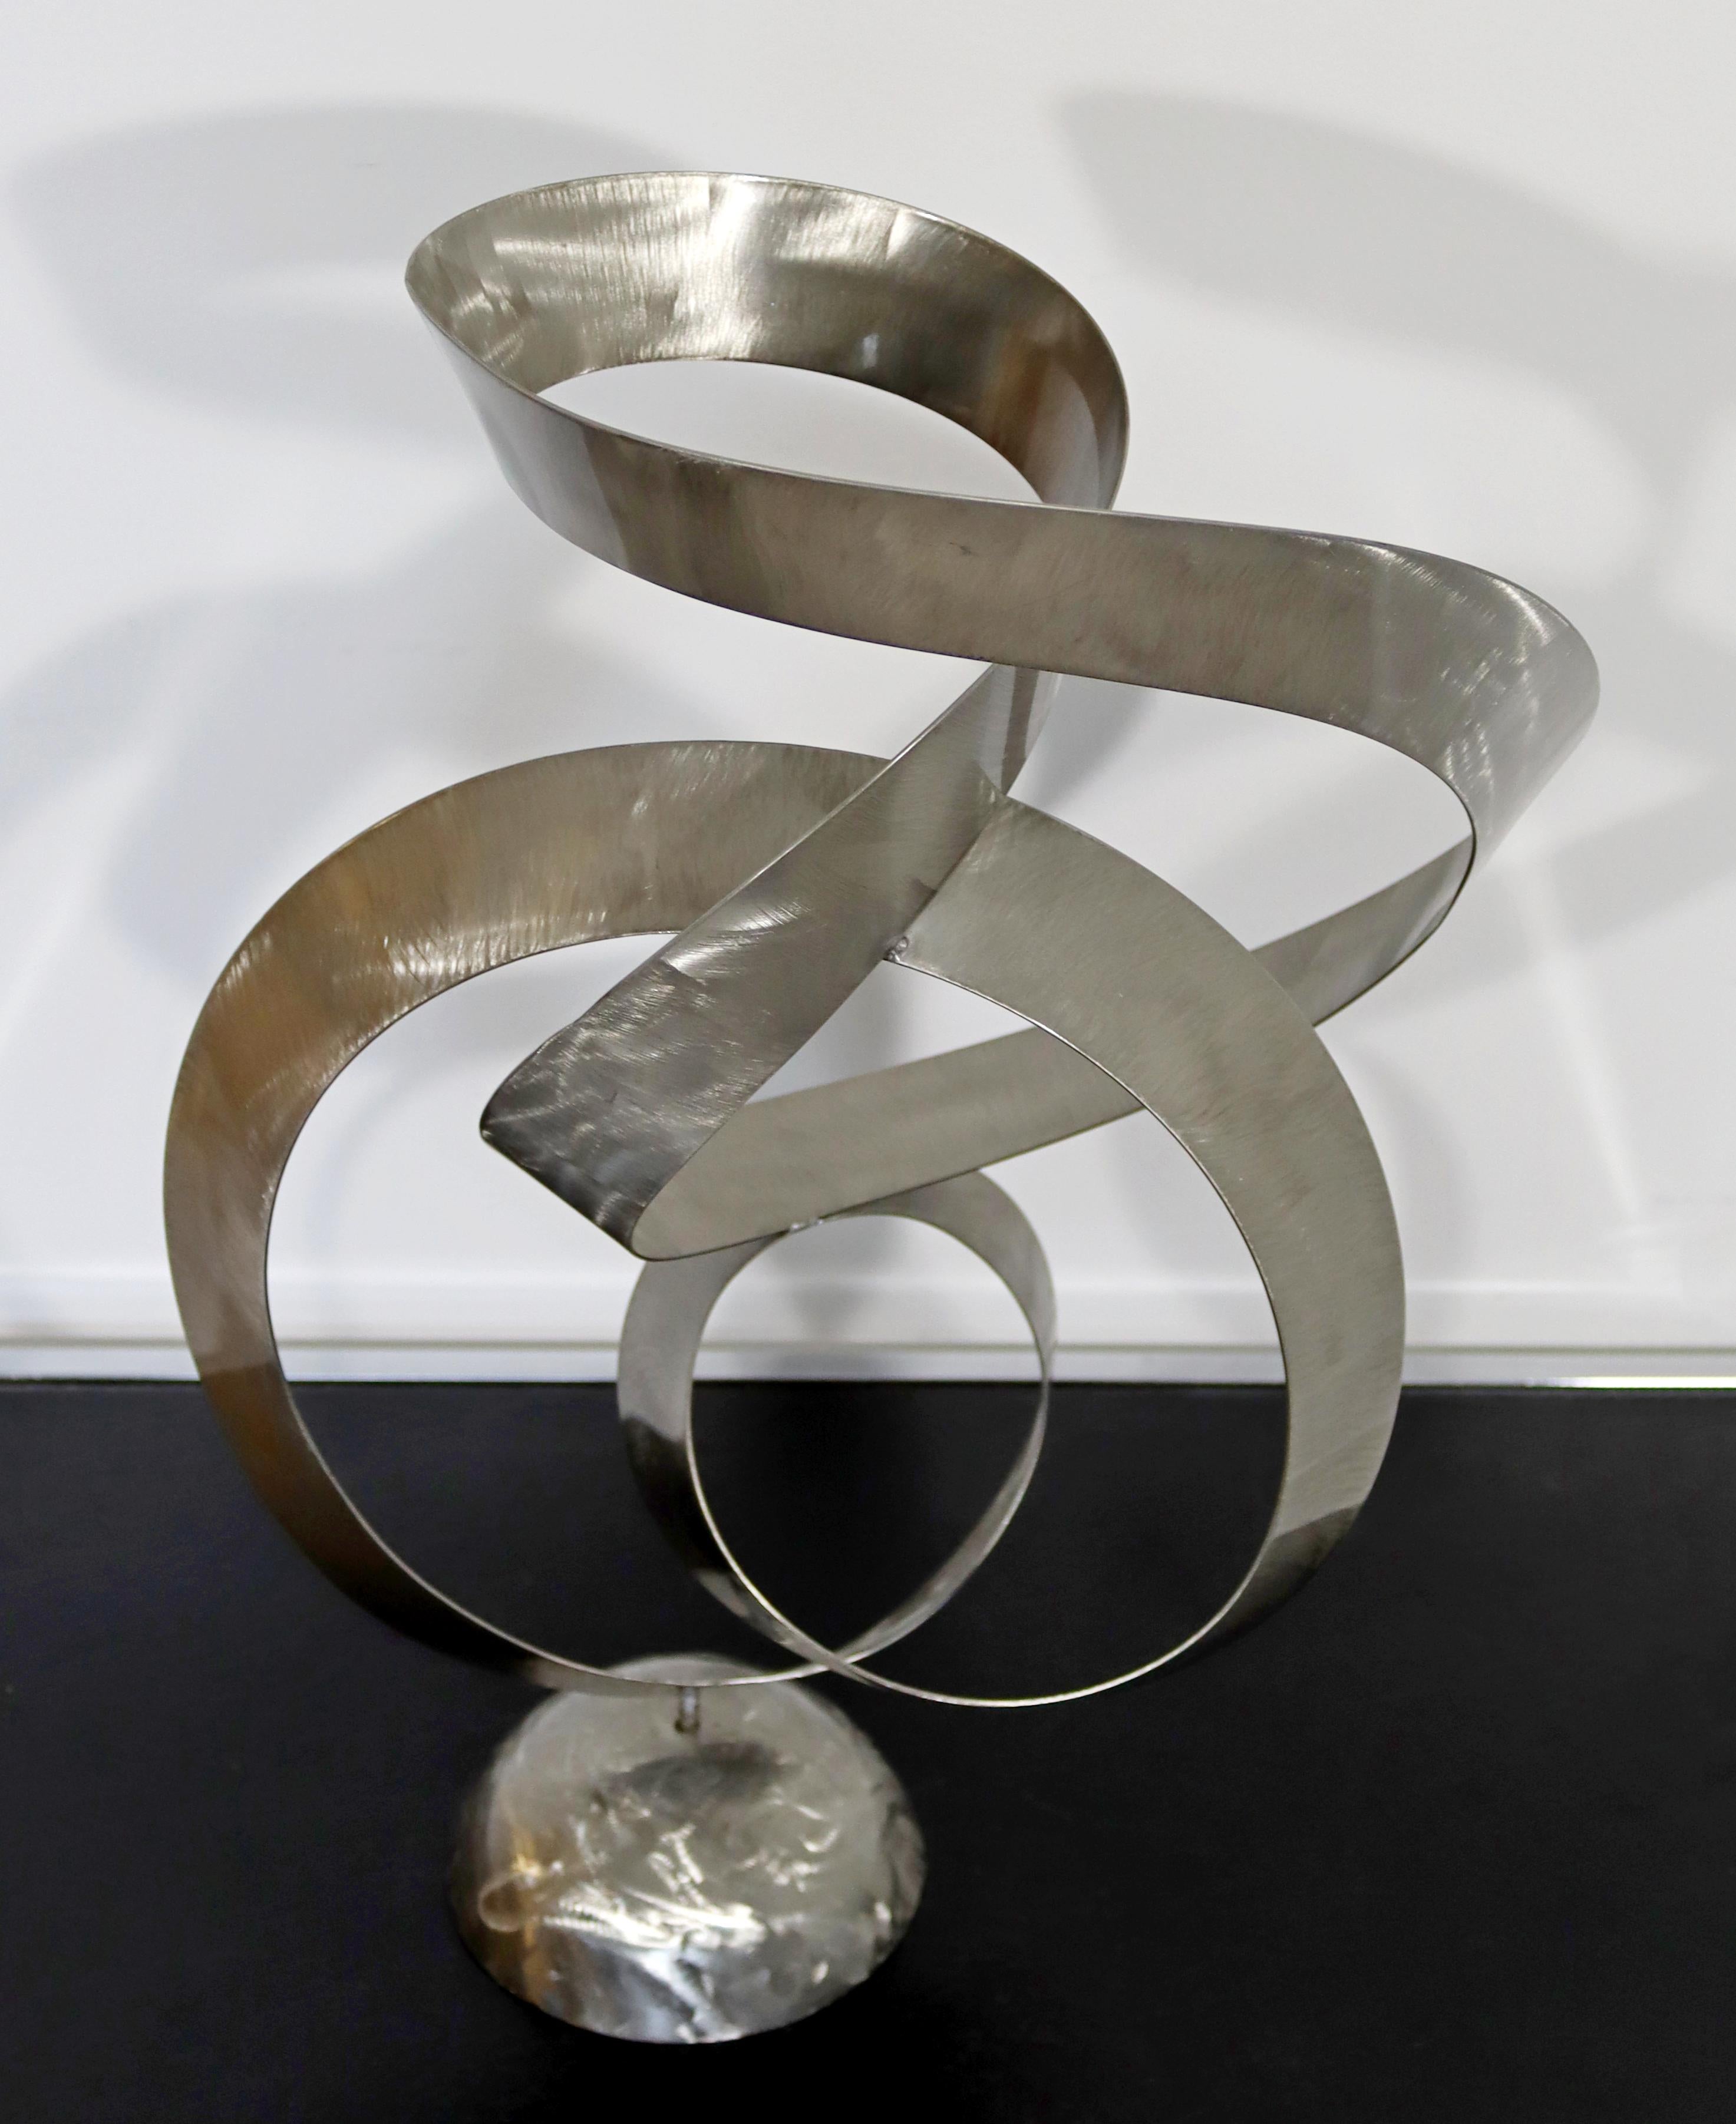 For your consideration is a phenomenal, French, abstract table sculpture, made of brushed aluminum, circa the 1970s. In excellent vintage condition. The dimensions are 13